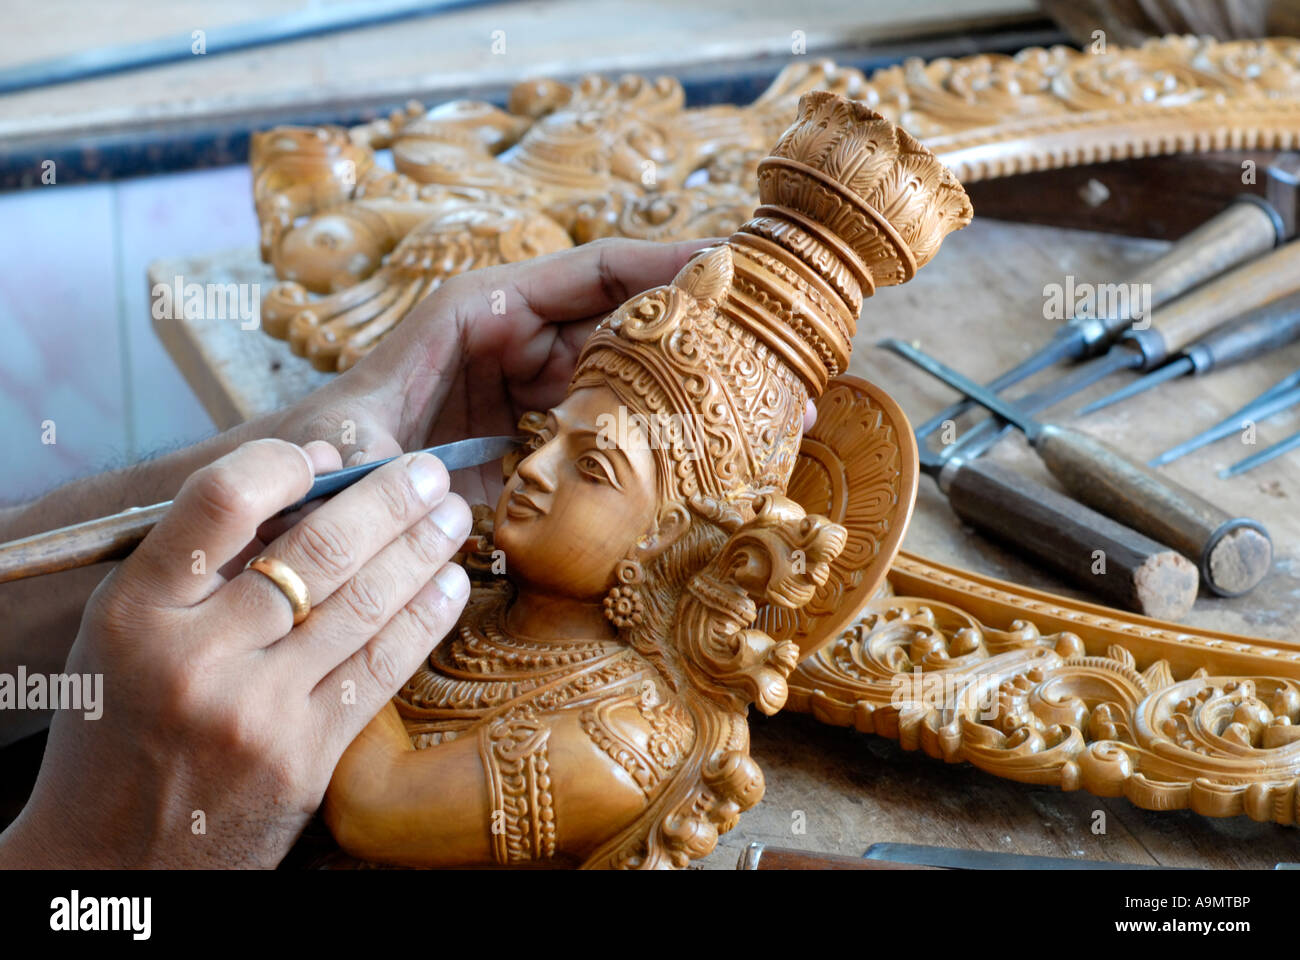 TRADITIONAL WOOD CARVING Stock Photo